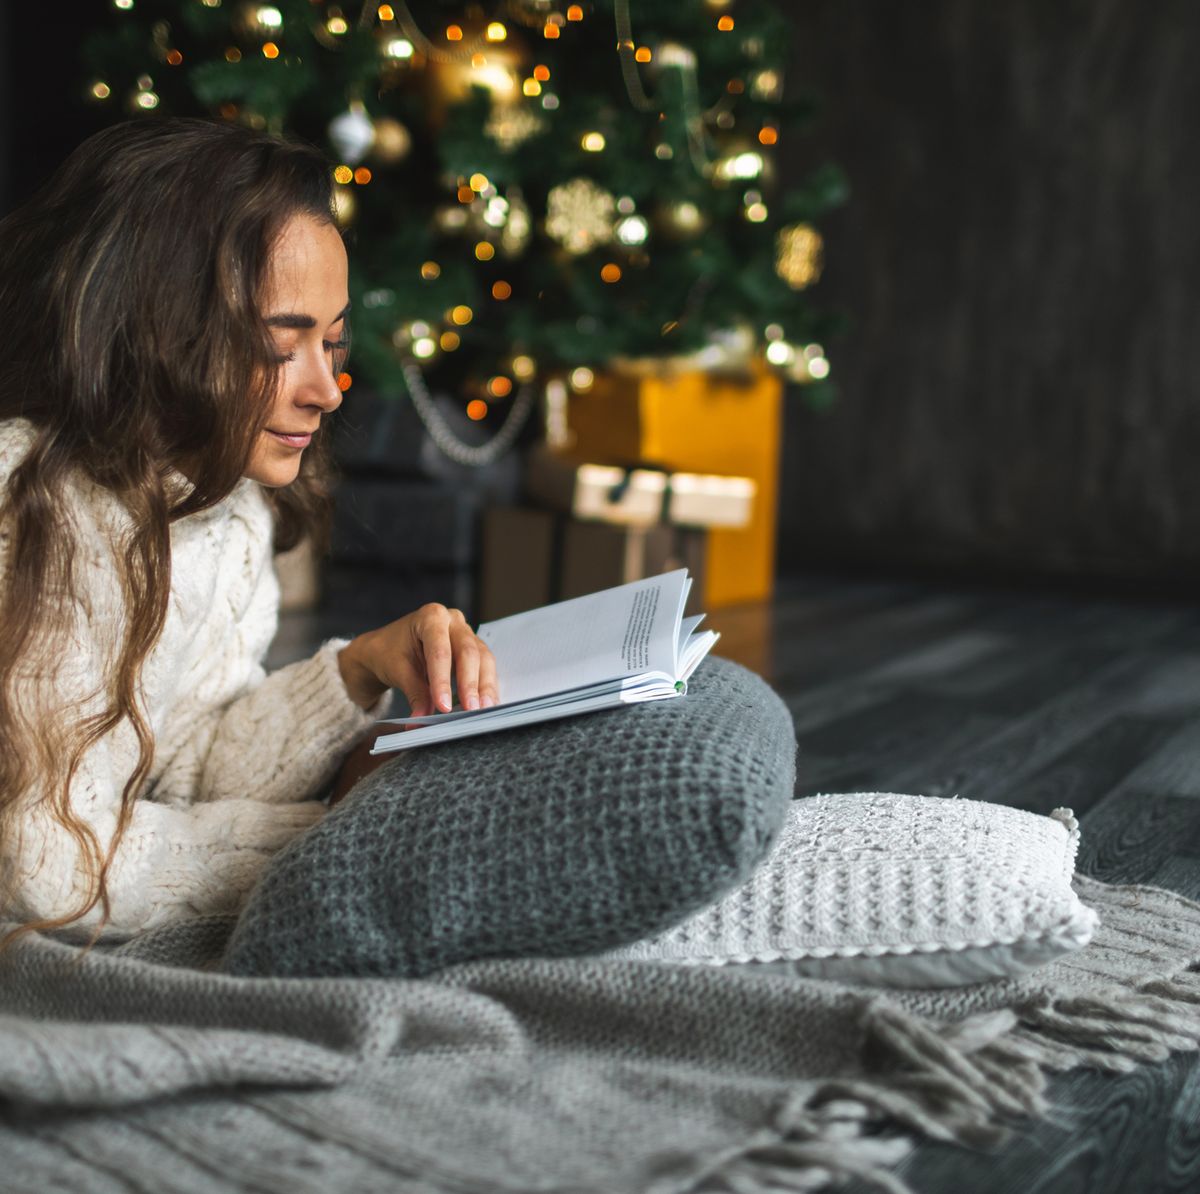 Spending Christmas Alone? 7 Tips From a Therapist